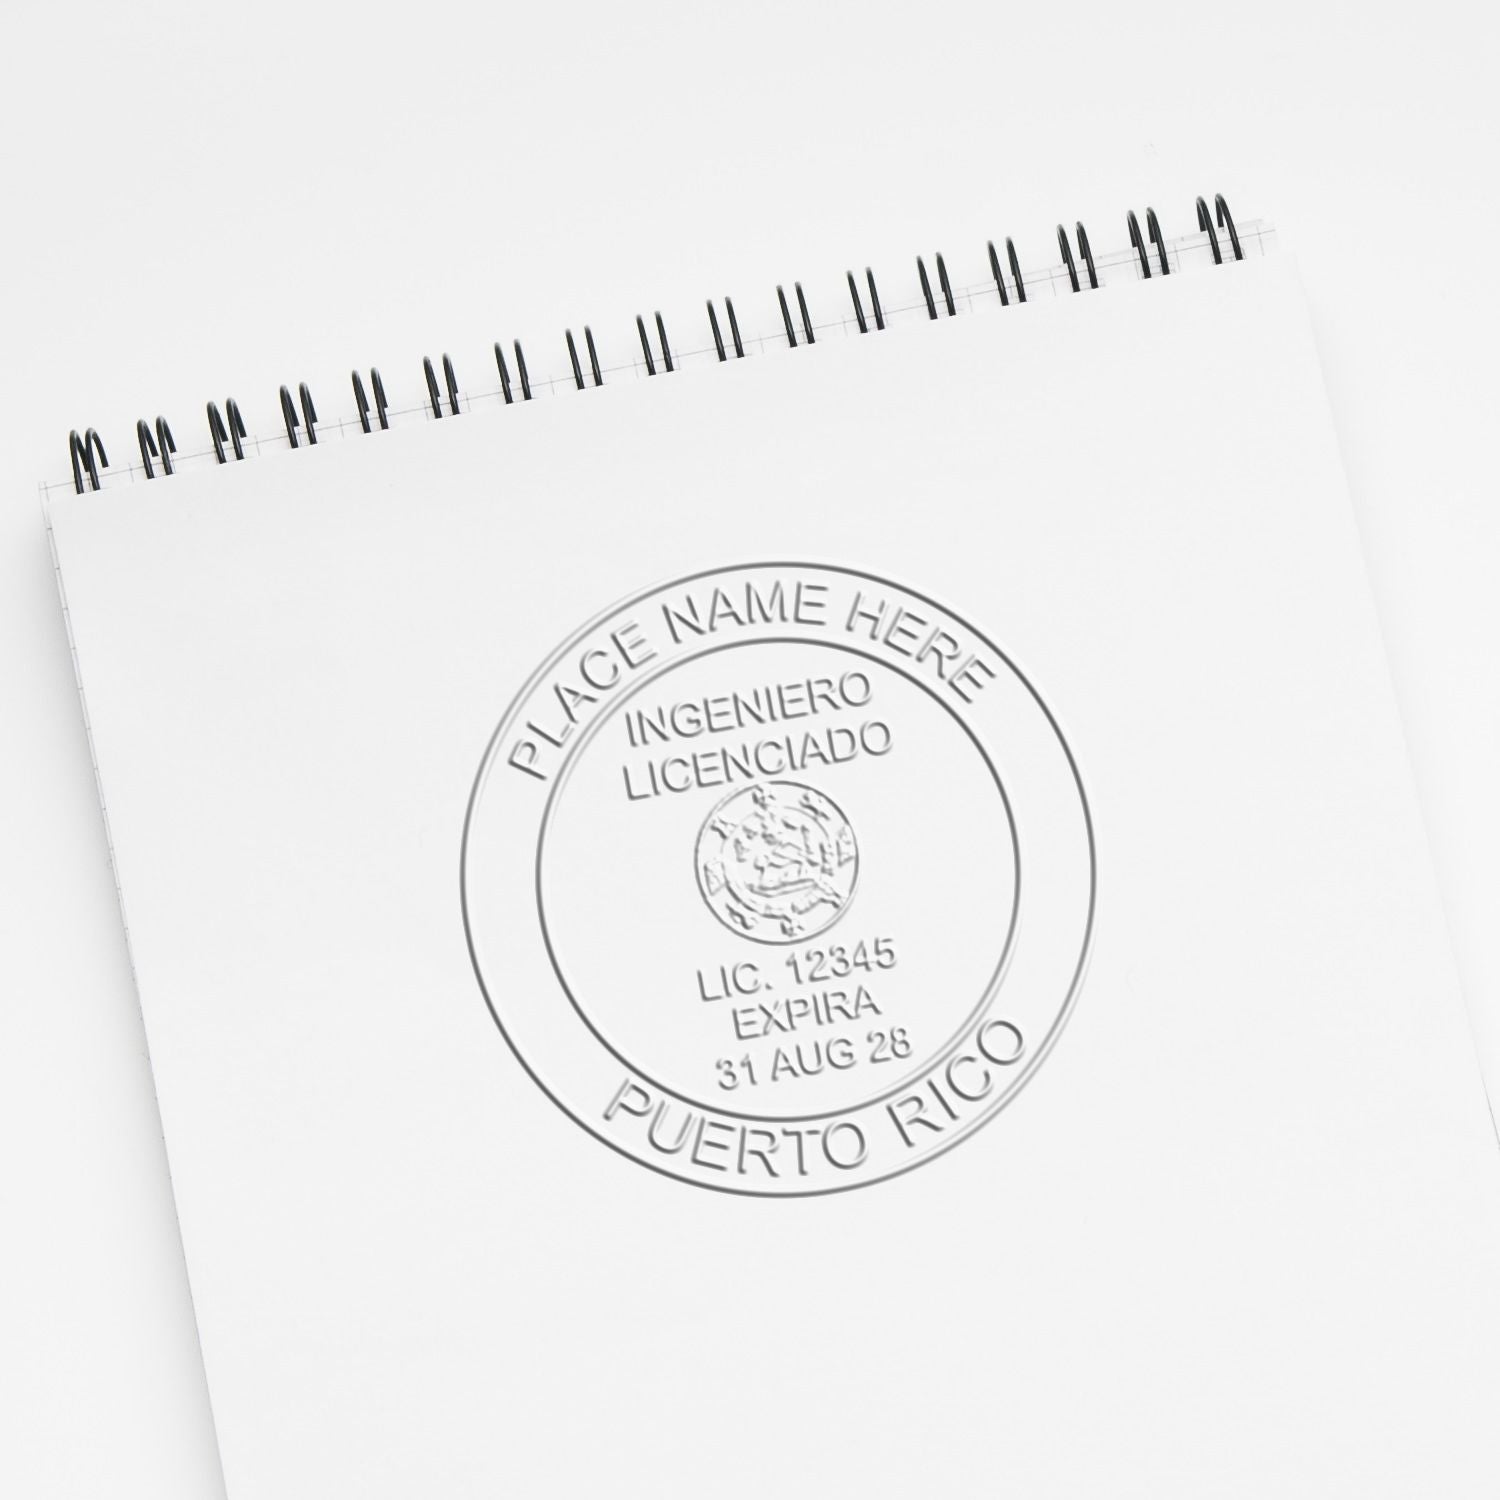 This paper is stamped with a sample imprint of the Soft Puerto Rico Professional Engineer Seal, signifying its quality and reliability.